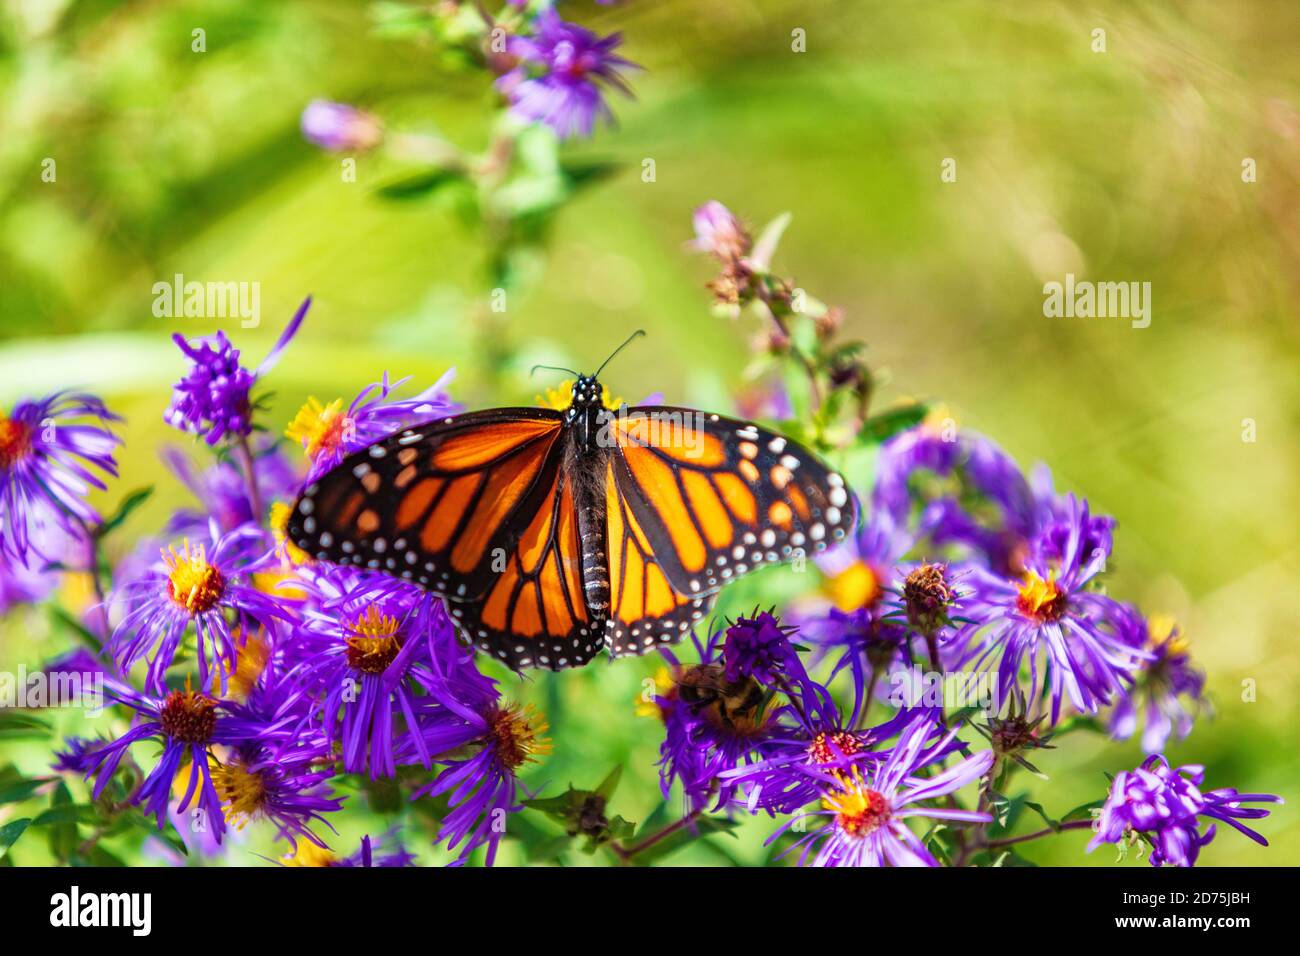 Monarch butterfly on purple asters flowers in Autumn nature garden background. Butterflies flying outdoor Stock Photo